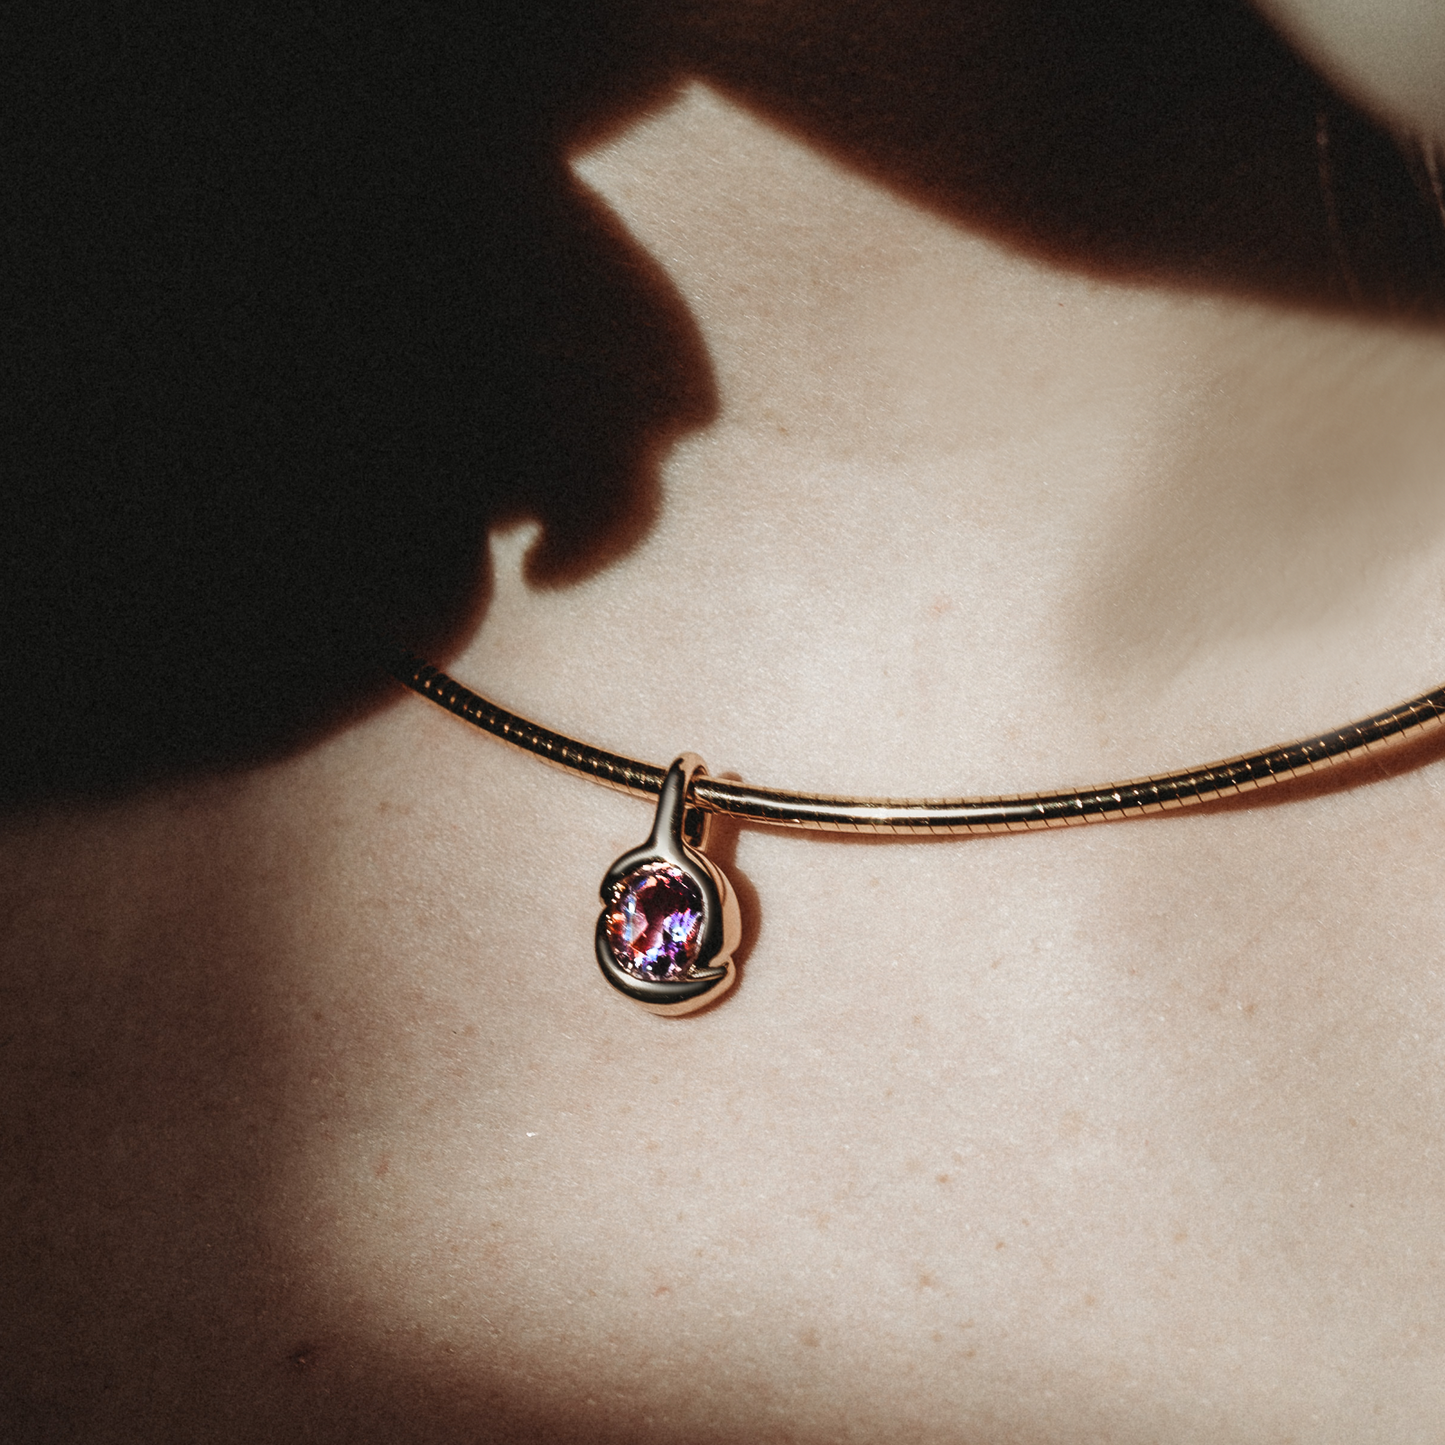 Molten knot charm with gemstone. Styled on a neck hanging from the omega chocker necklace.